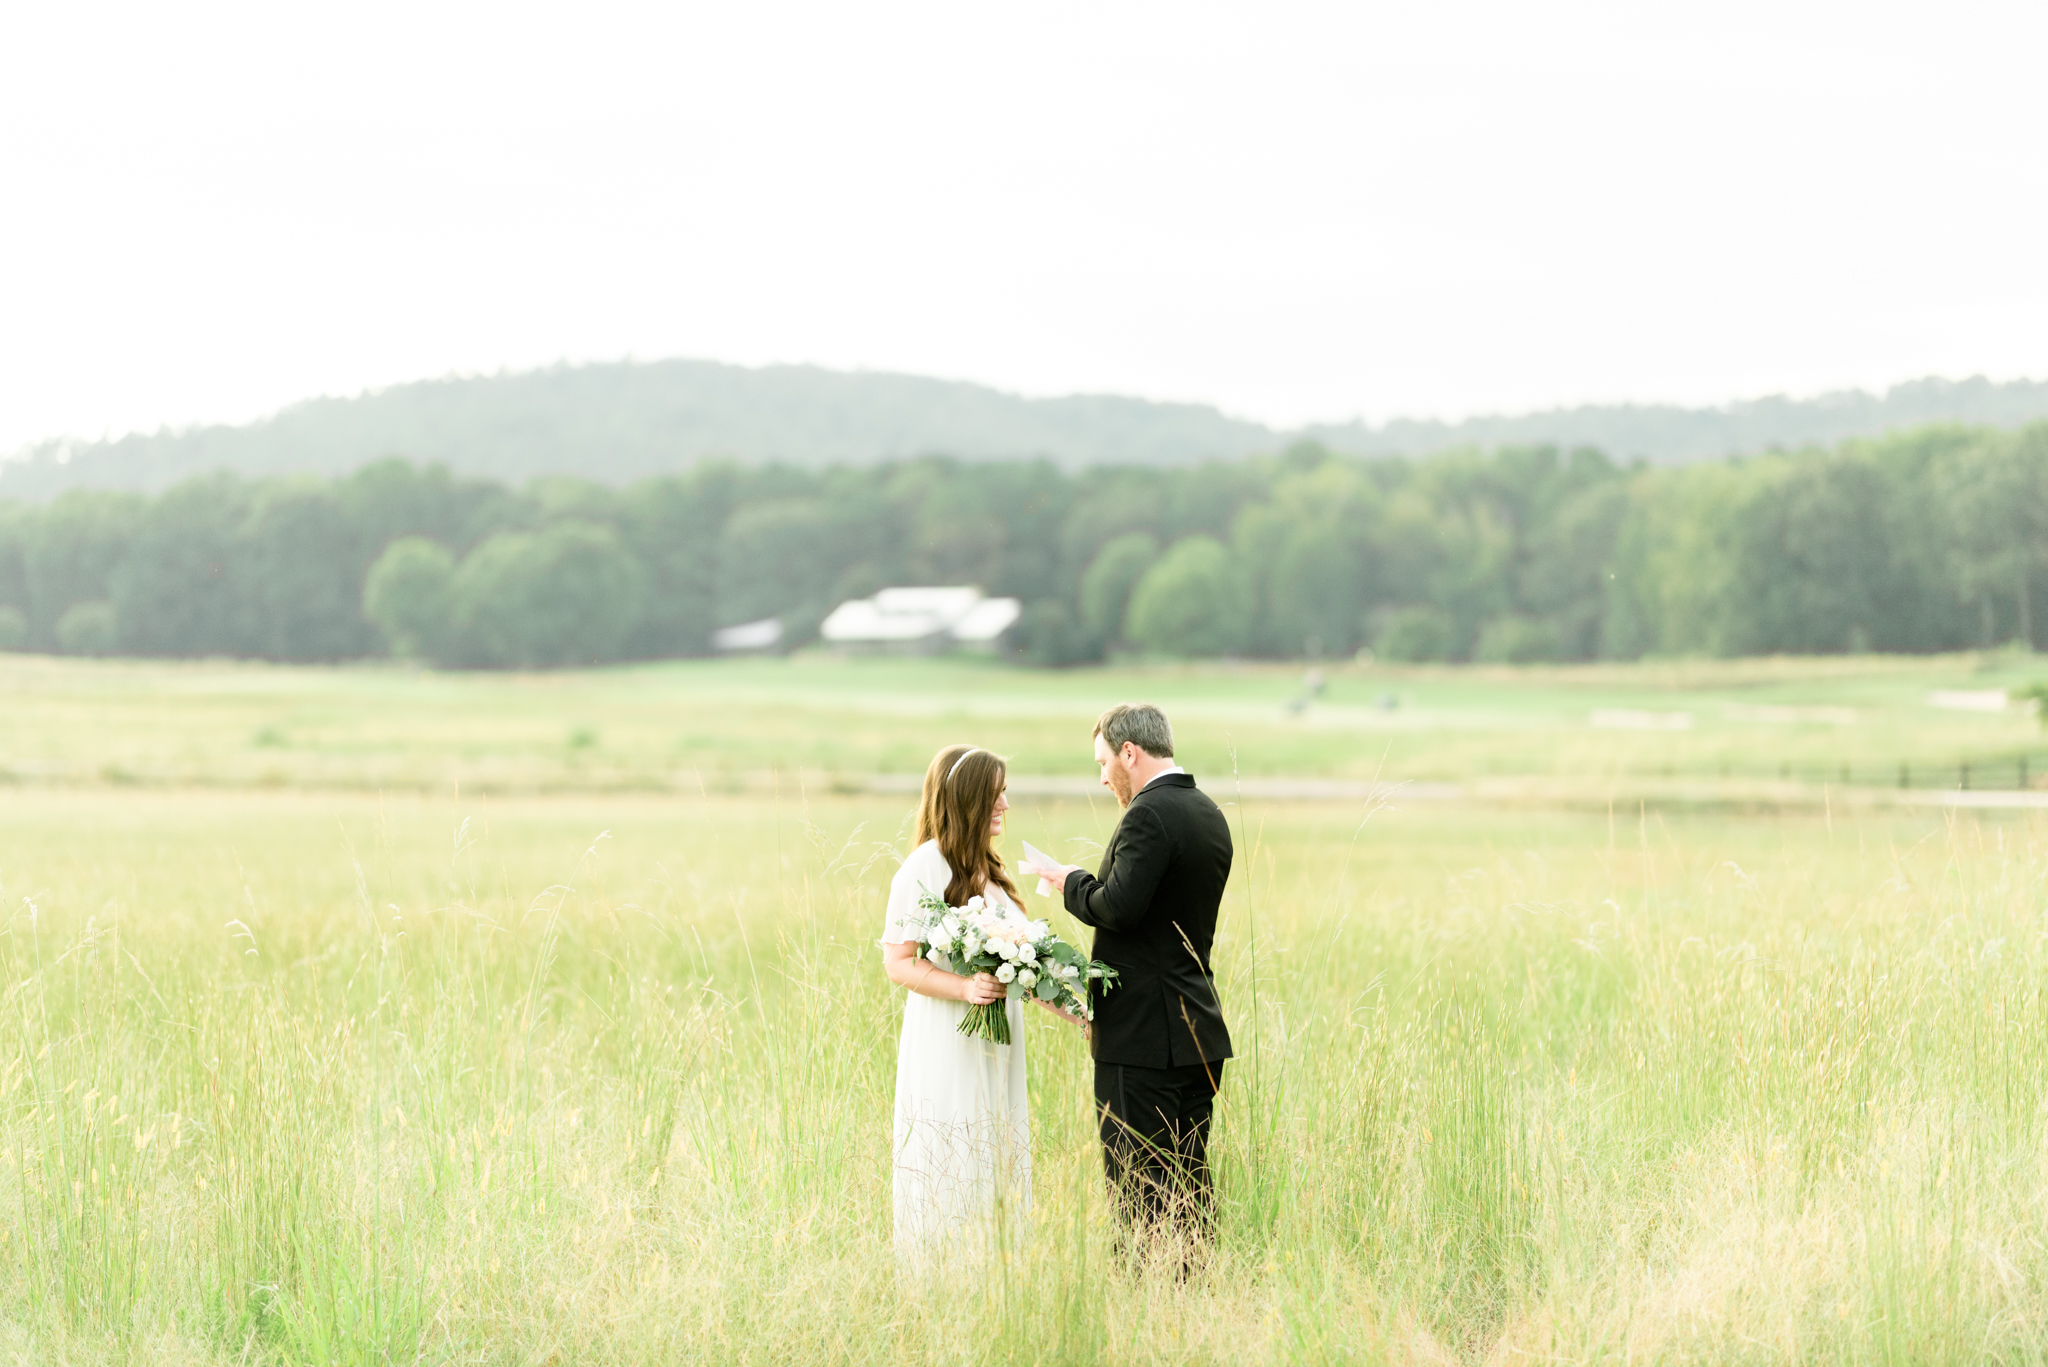 Couple stands in field and renews vows.